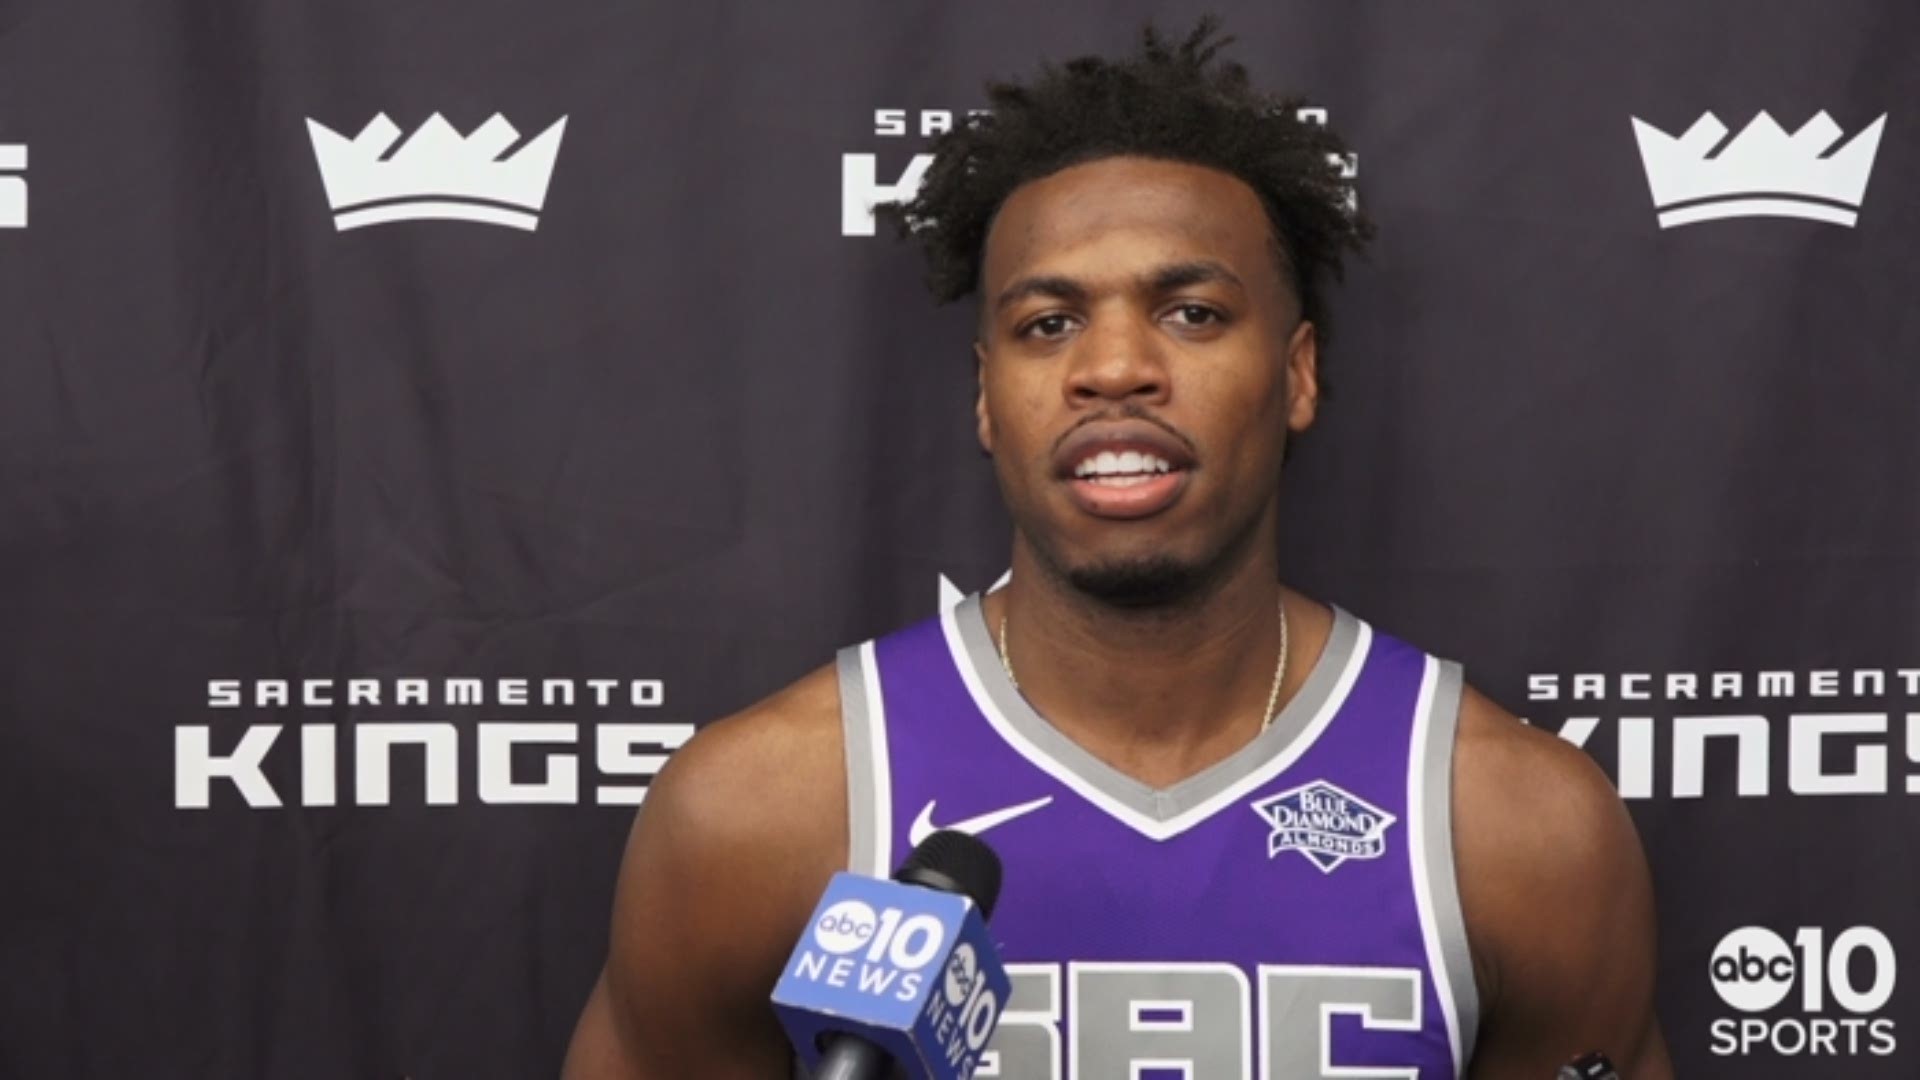 Kings guard Buddy Hield talks about his offseason work, the traveling he did this summer and how he's been working on his ball handling and passing.